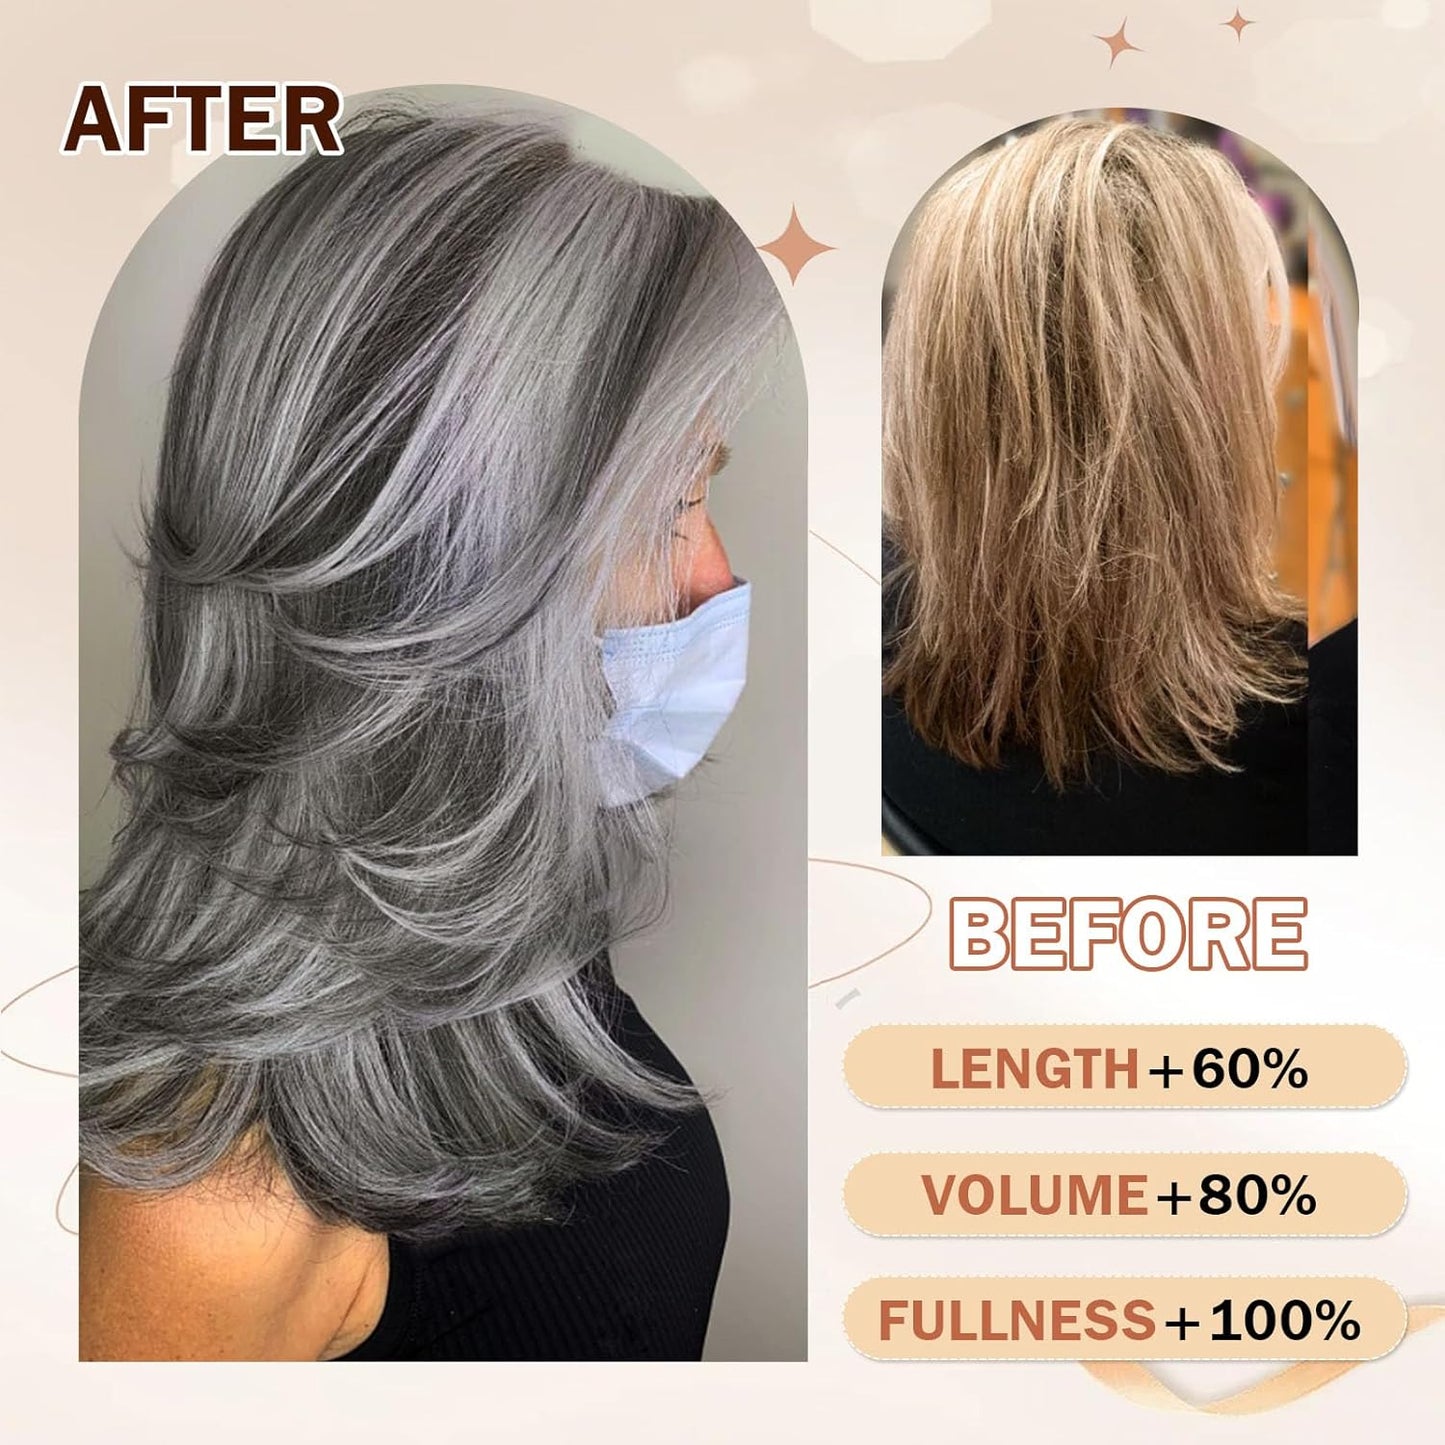 Silver Wig Ombre Gray Wigs with Curtain Bangs for Women Synthetic Highlight Gray Bob Wig Short Silver Wig with Bangs Layered Wig 12Inch Light Grey Short Hair Wigs for Daily Party Use